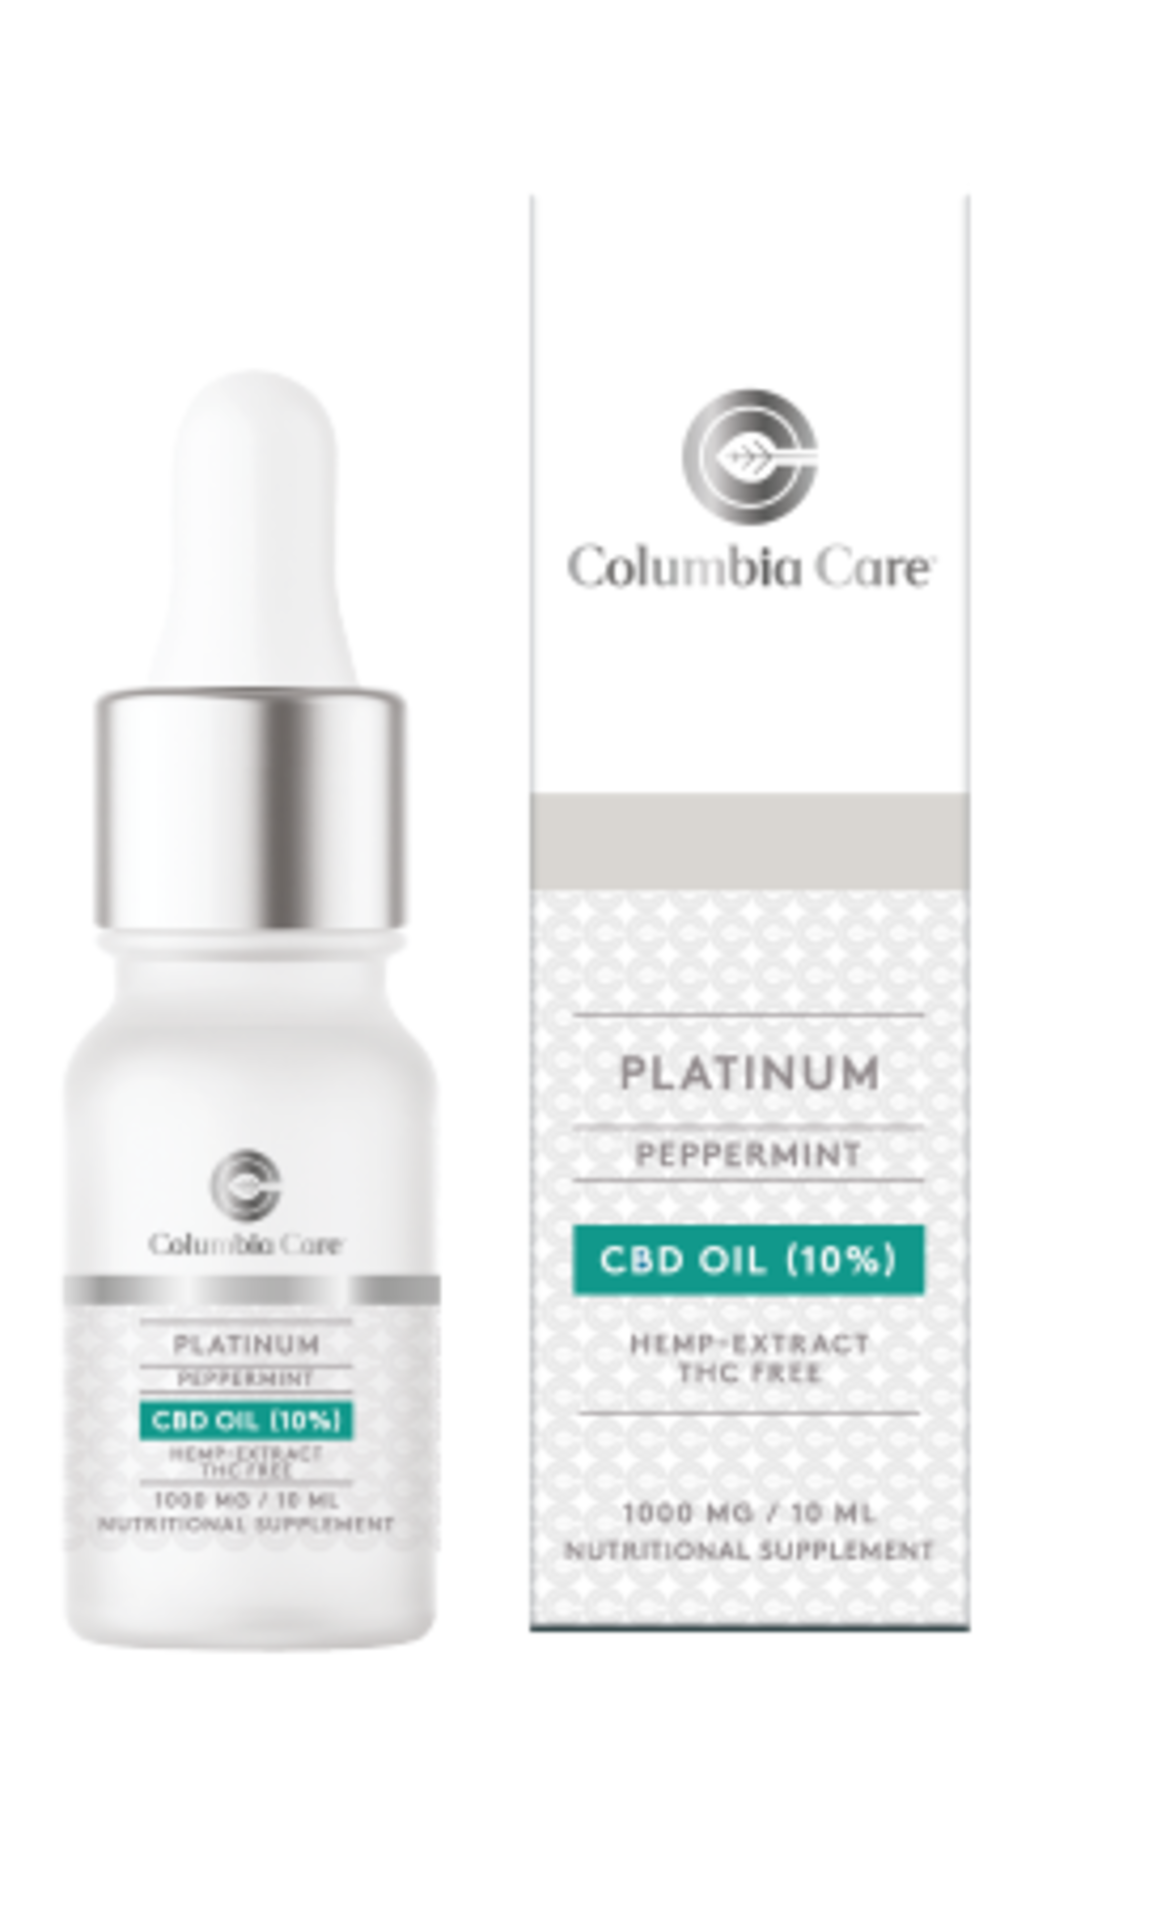 2 x Brand New Columbia Care Platinum Peppermint Flavored Tincture 10ml 1000mg. Columbia Care, a